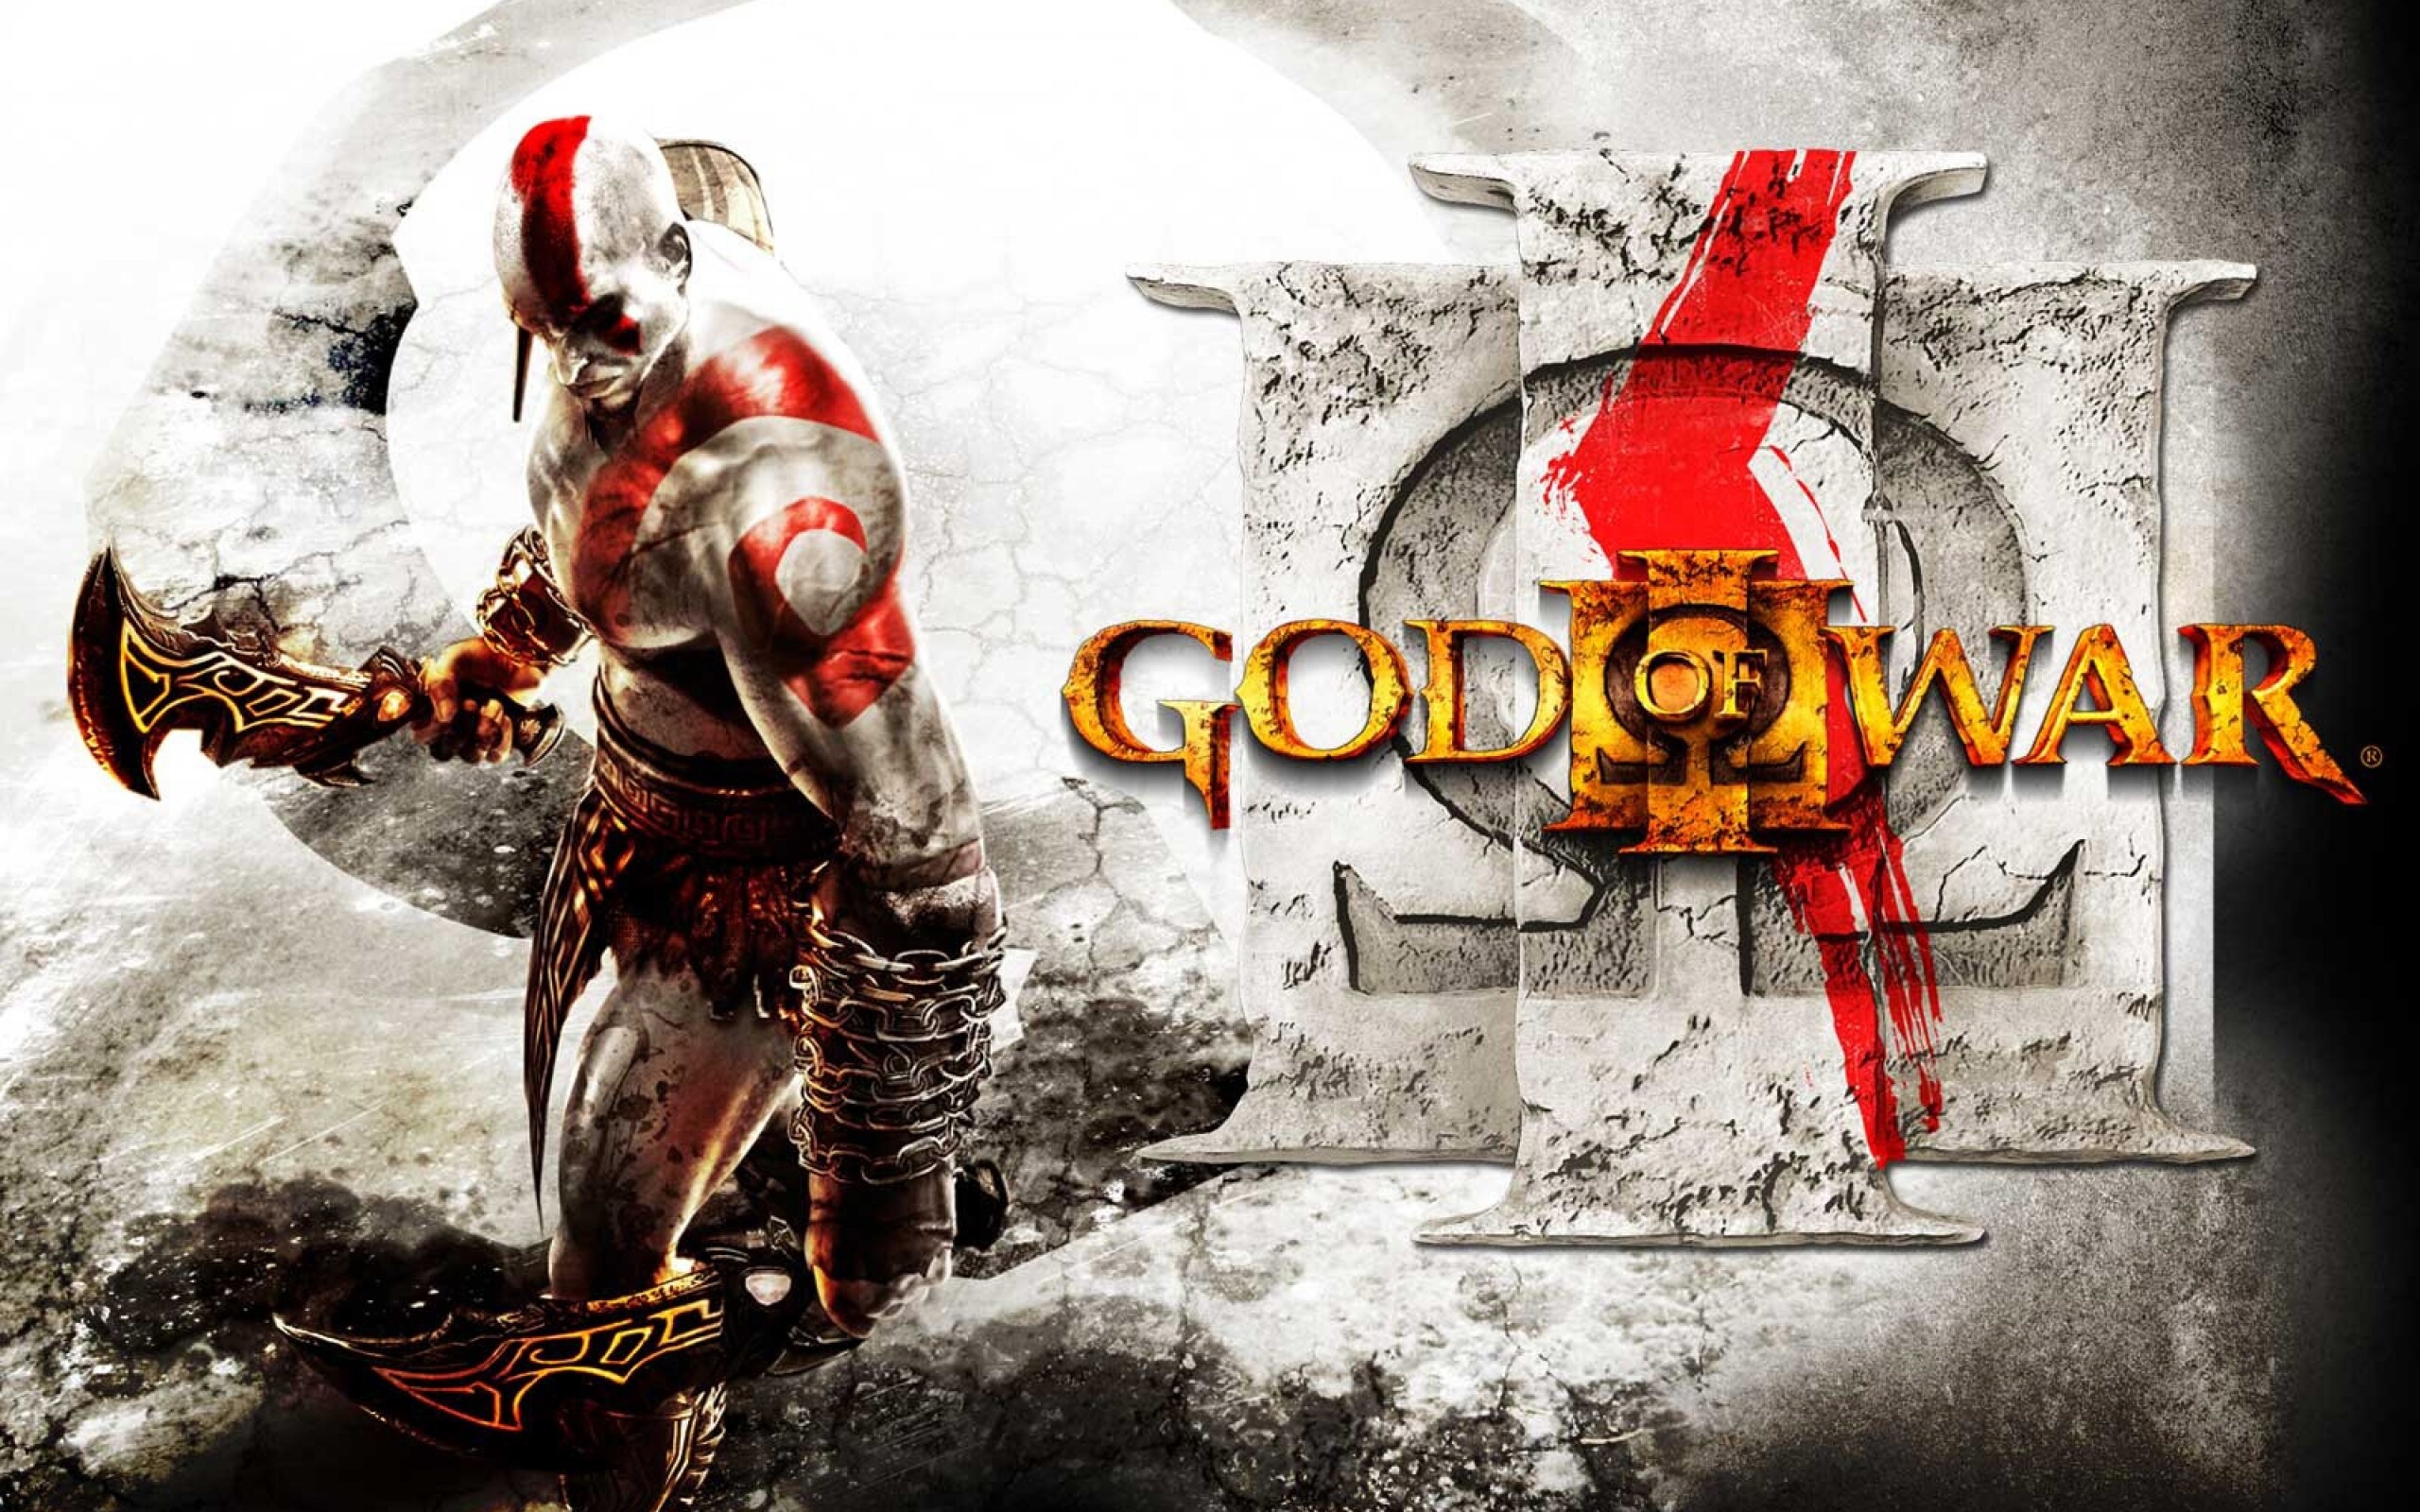 God of War: Throughout the series, the player controls the character Kratos in a combination of hack-and-slash combat, platforming, and puzzle game elements to achieve goals and complete the story. 2560x1600 HD Background.